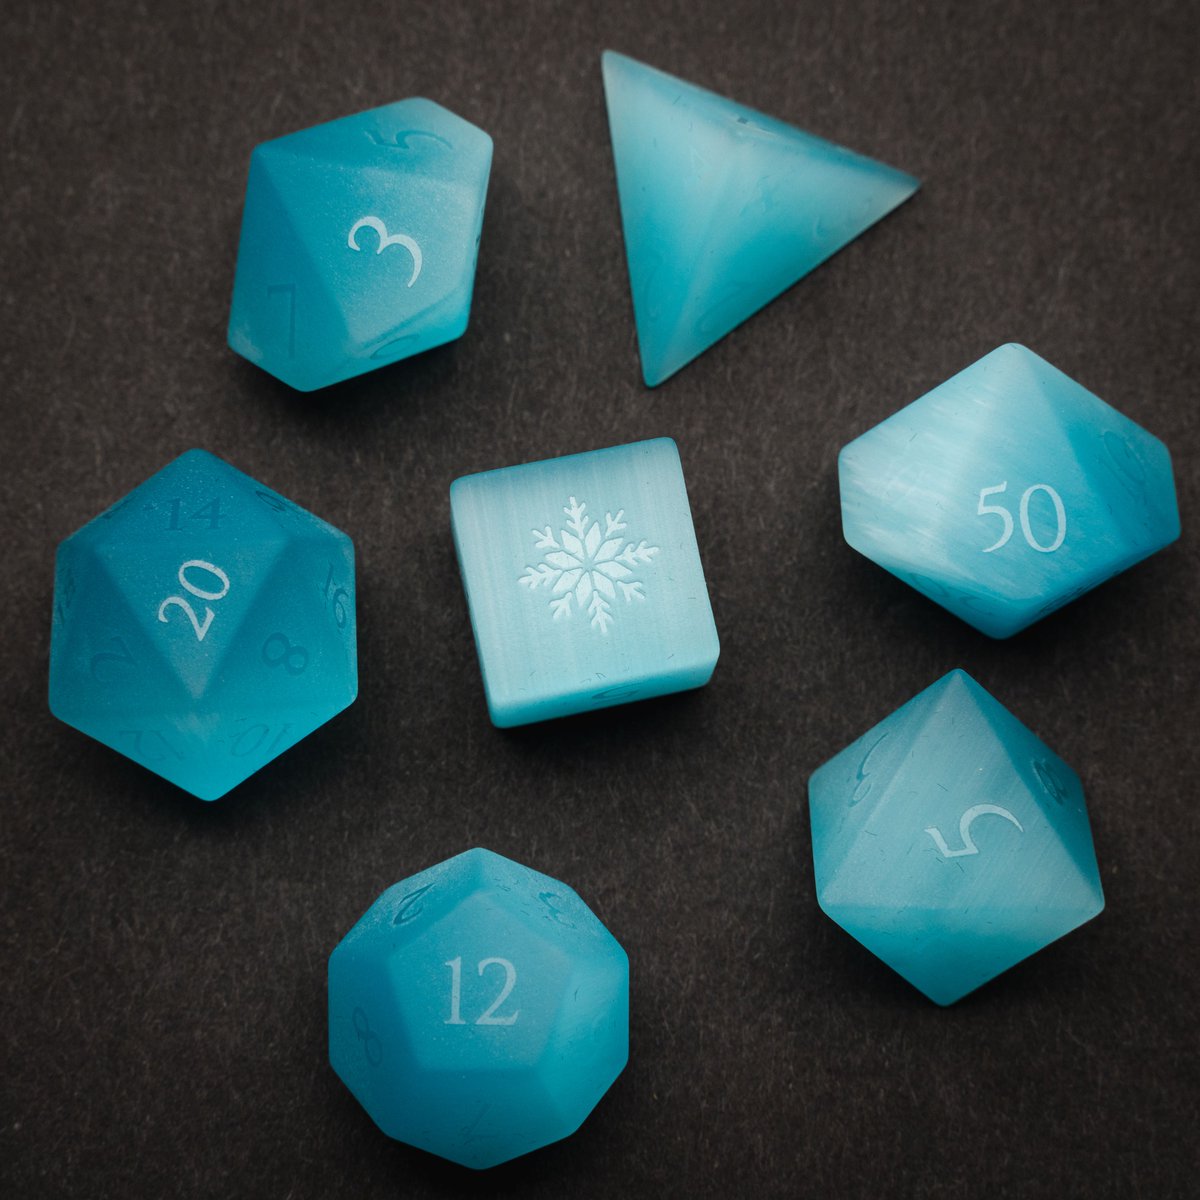 ❄ Big Giveaway! ❄

We're giving away a set of frosty and translucent, Raised Cat’s Eye Turquoise which features a snowflake on the d6🤩! Available NOW on our website.

Rules to enter👇
- Retweet💬 + Like❤️ + Follow⭐
- Comment with your favorite gemstone!
#WyrmwoodWednesday